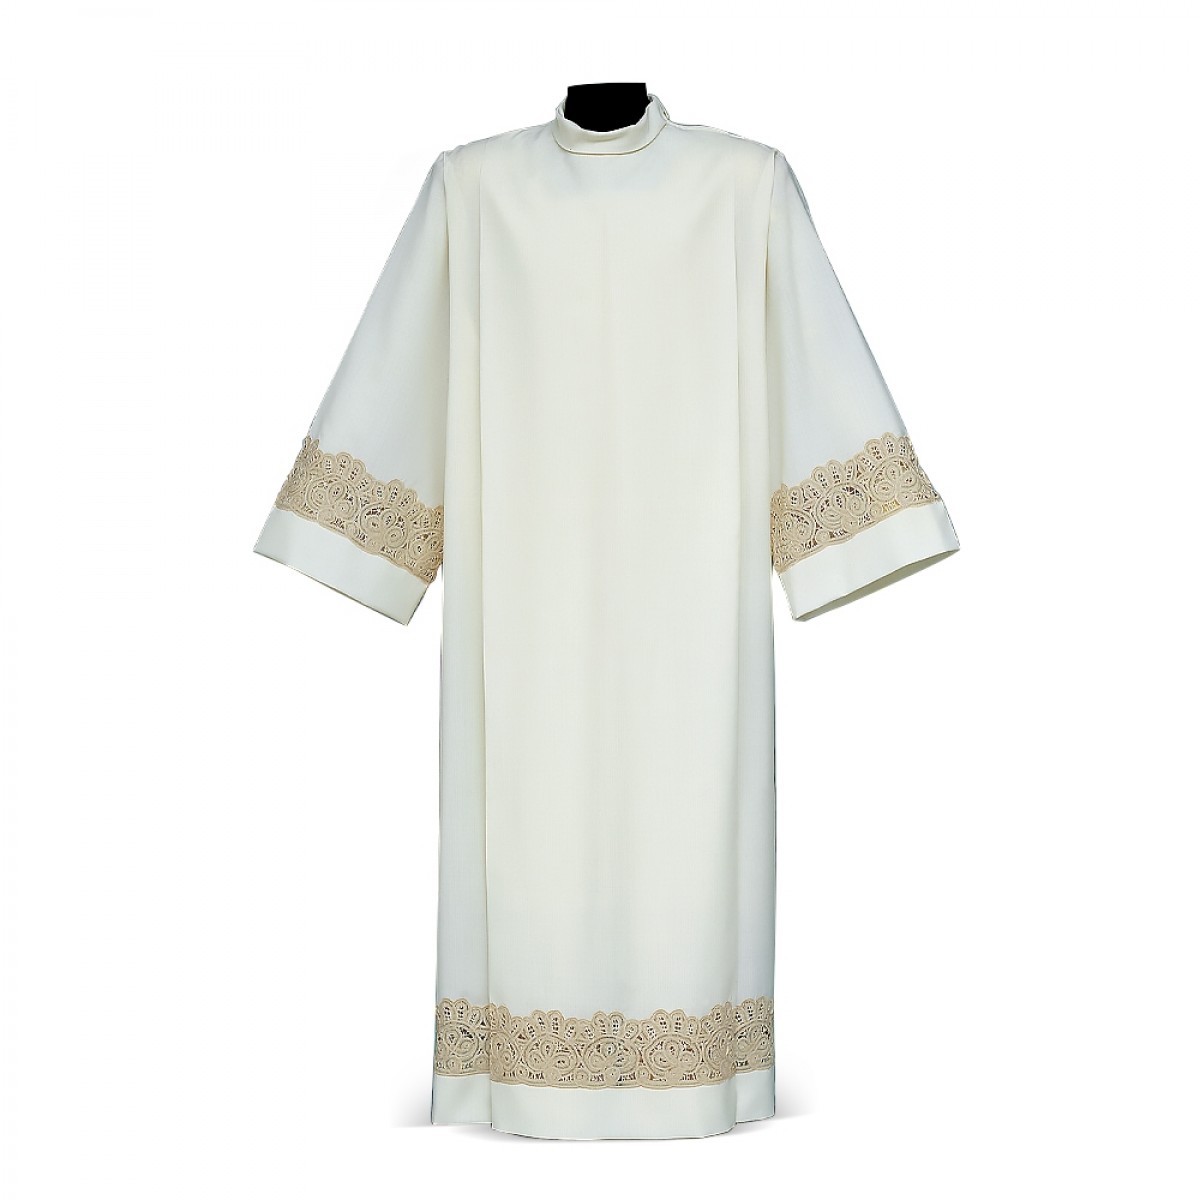 FIORI Liturgical ENTREDEUR Design - in Vestments #111 and with Blend Roman Paraments - Albs Vestments Ivory Wool - Embroidery Alb